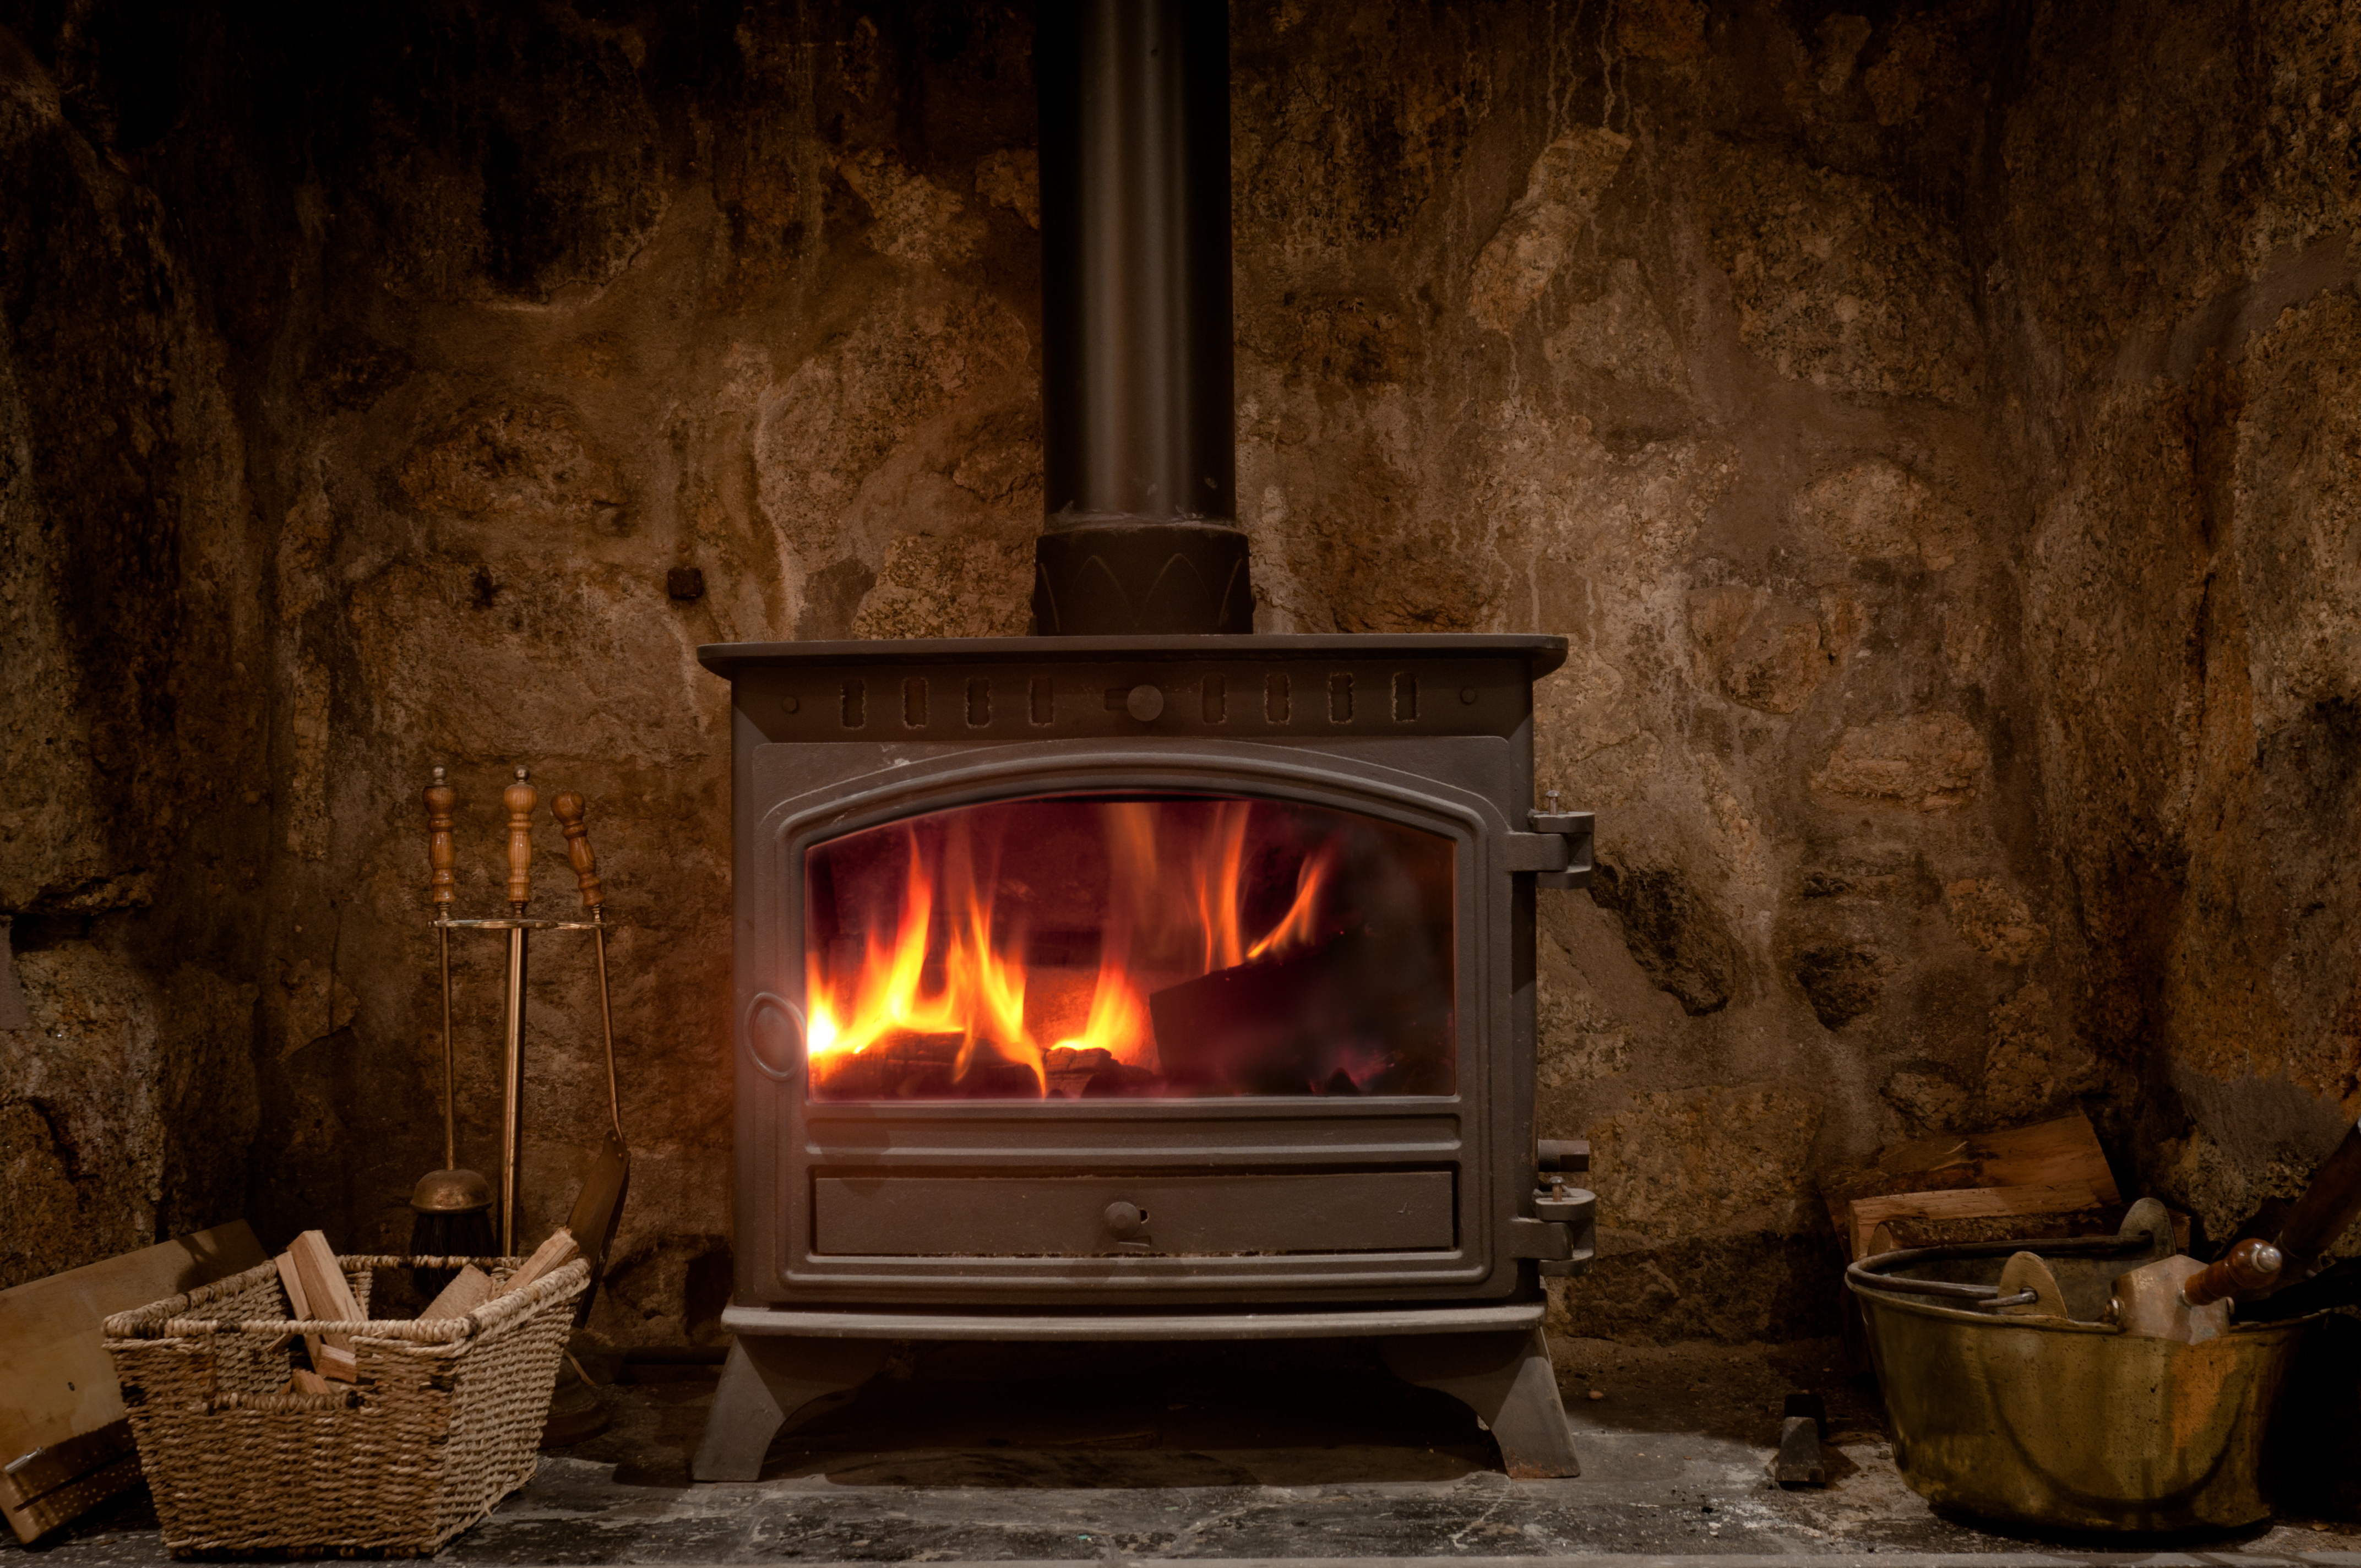 Wood Burning Stove Fireplace Inspirational How to Control the Air In A Wood Burning Stove